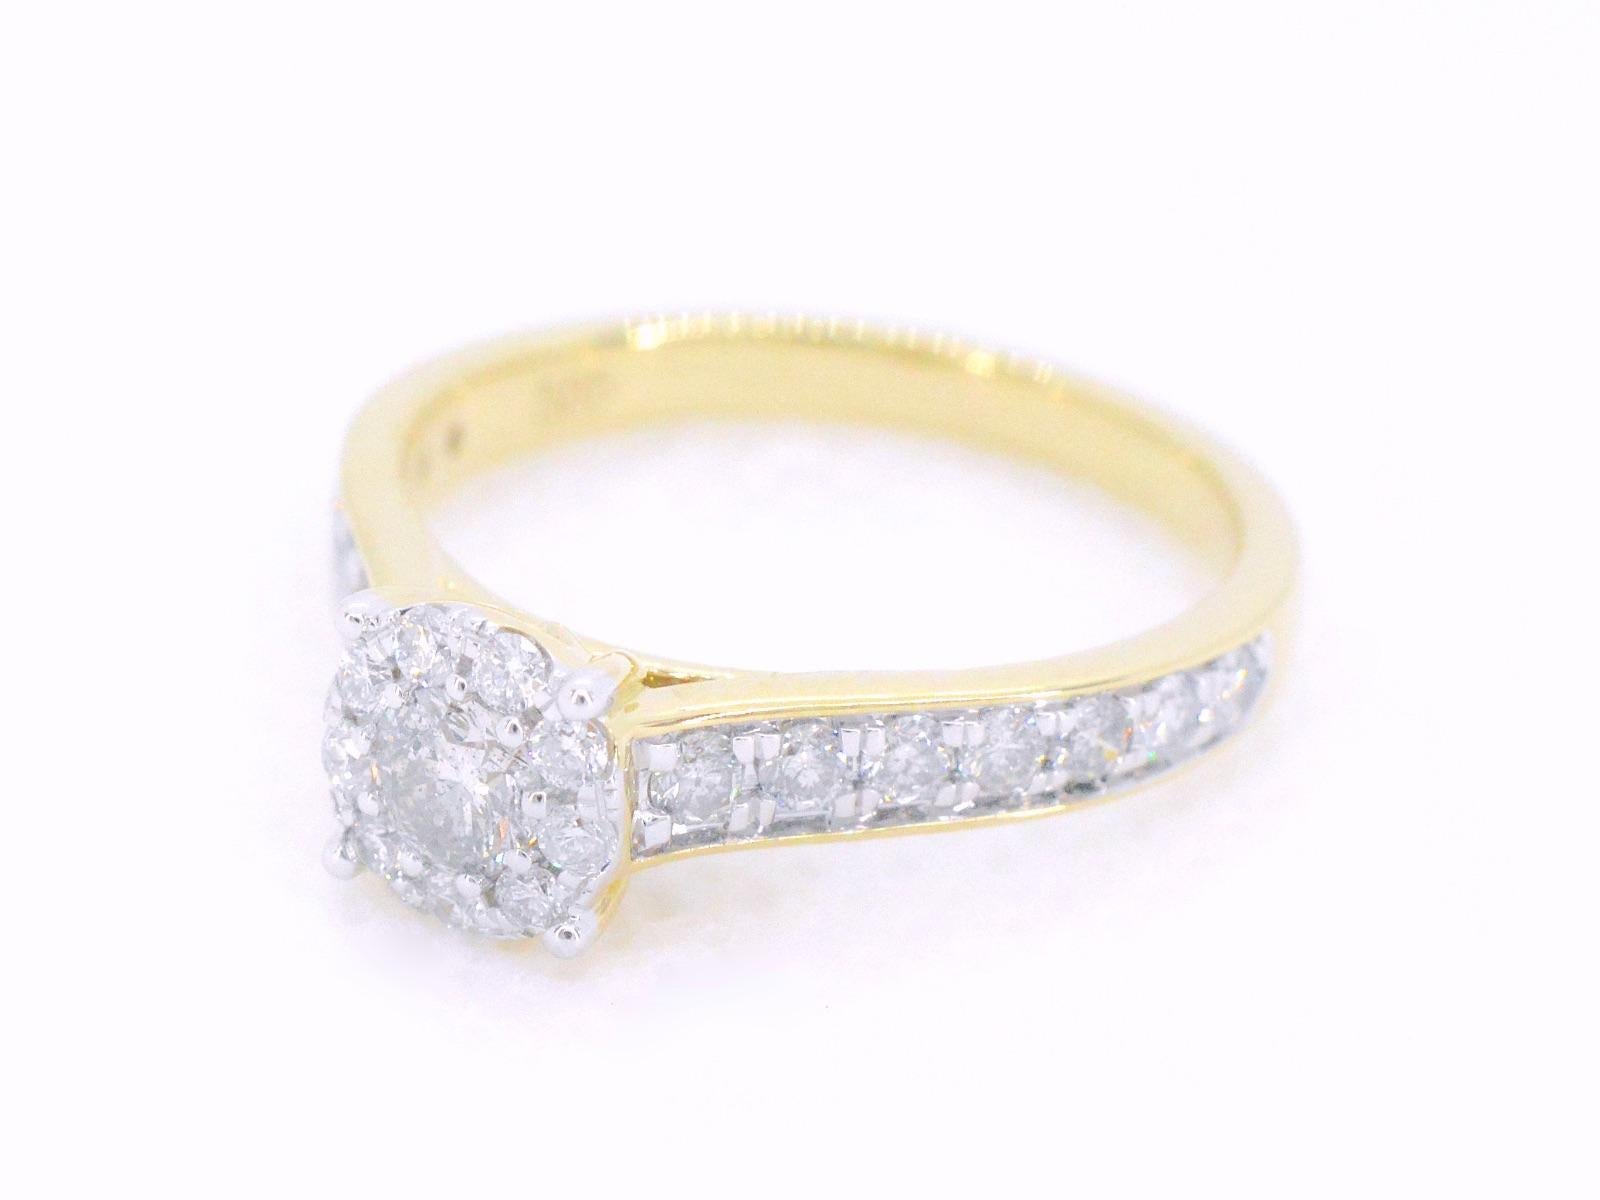 A yellow gold entourage ring with diamonds is a breathtaking piece of jewelry that features a center diamond surrounded by smaller diamonds, set in a band of lustrous yellow gold. The entourage design enhances the beauty of the center gemstone,